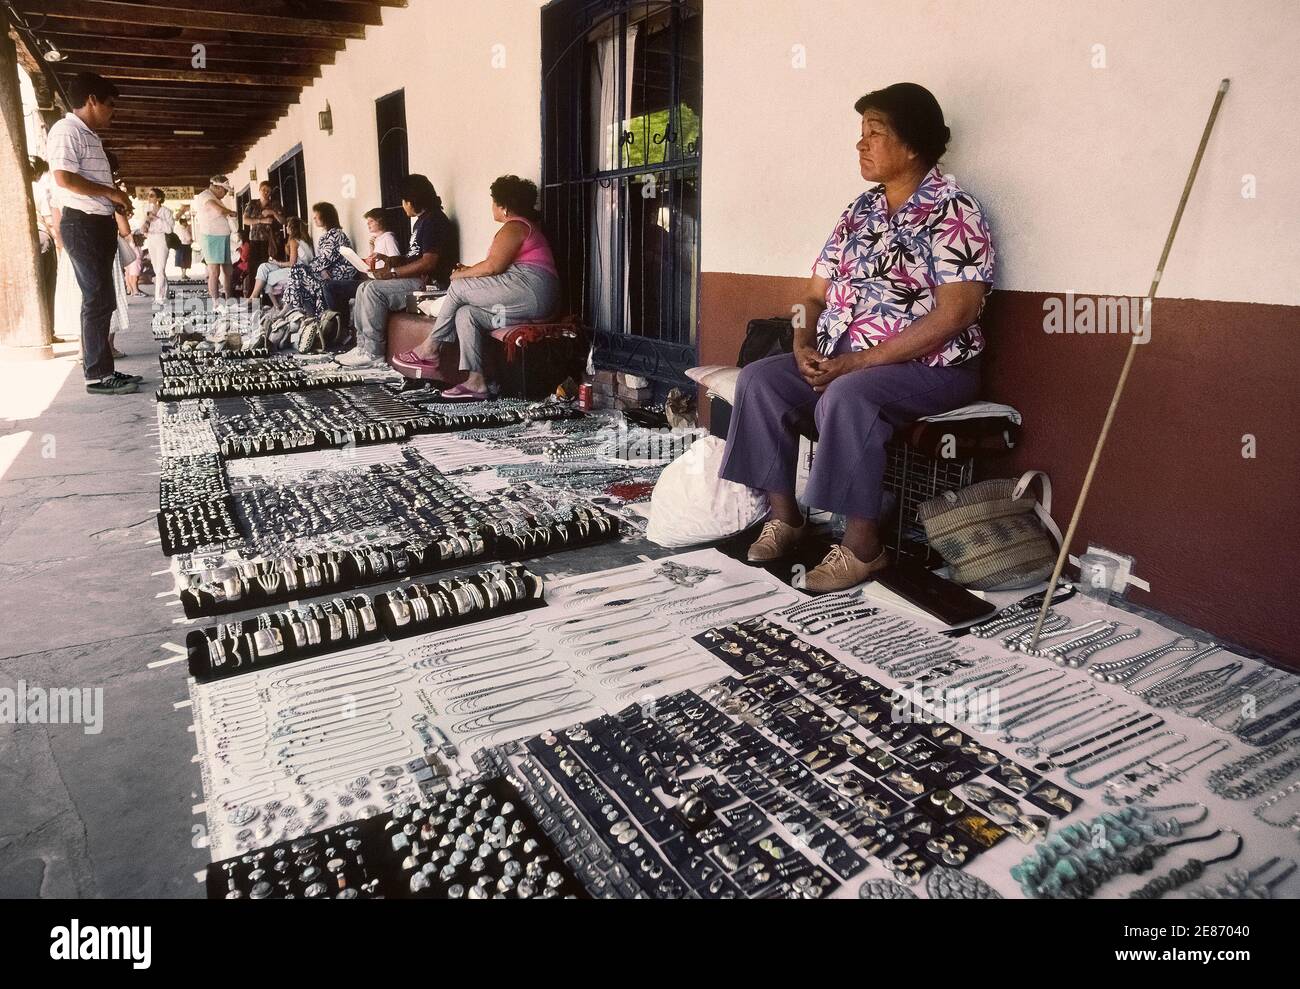 Native Americans and other local artisans sit in the shade behind their sidewalk displays of handmade jewelry awaiting tourists shopping for souvenirs in Old Town Plaza in Albuquerque, the capital of New Mexico, USA. This informal outdoor market on the east side of the plaza lines the covered patio in front of historic La Placita Dining Rooms that has been serving traditional New Mexican food since the 1930s. Stock Photo